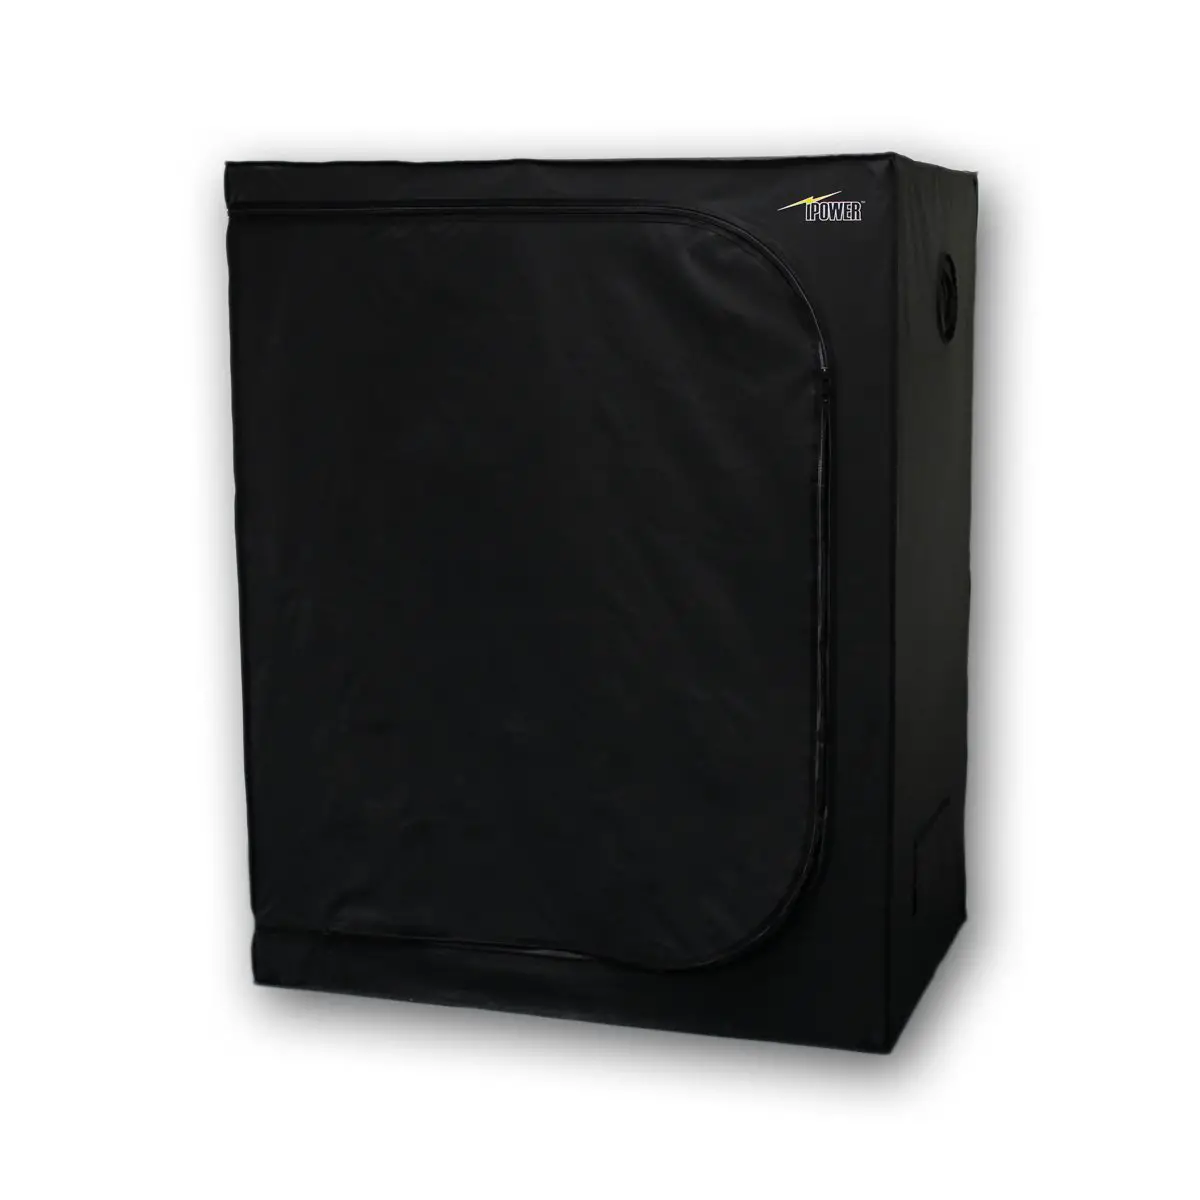 iPower 48x24x60 Hydroponic Water-Resistant Grow Tent for mushrooms